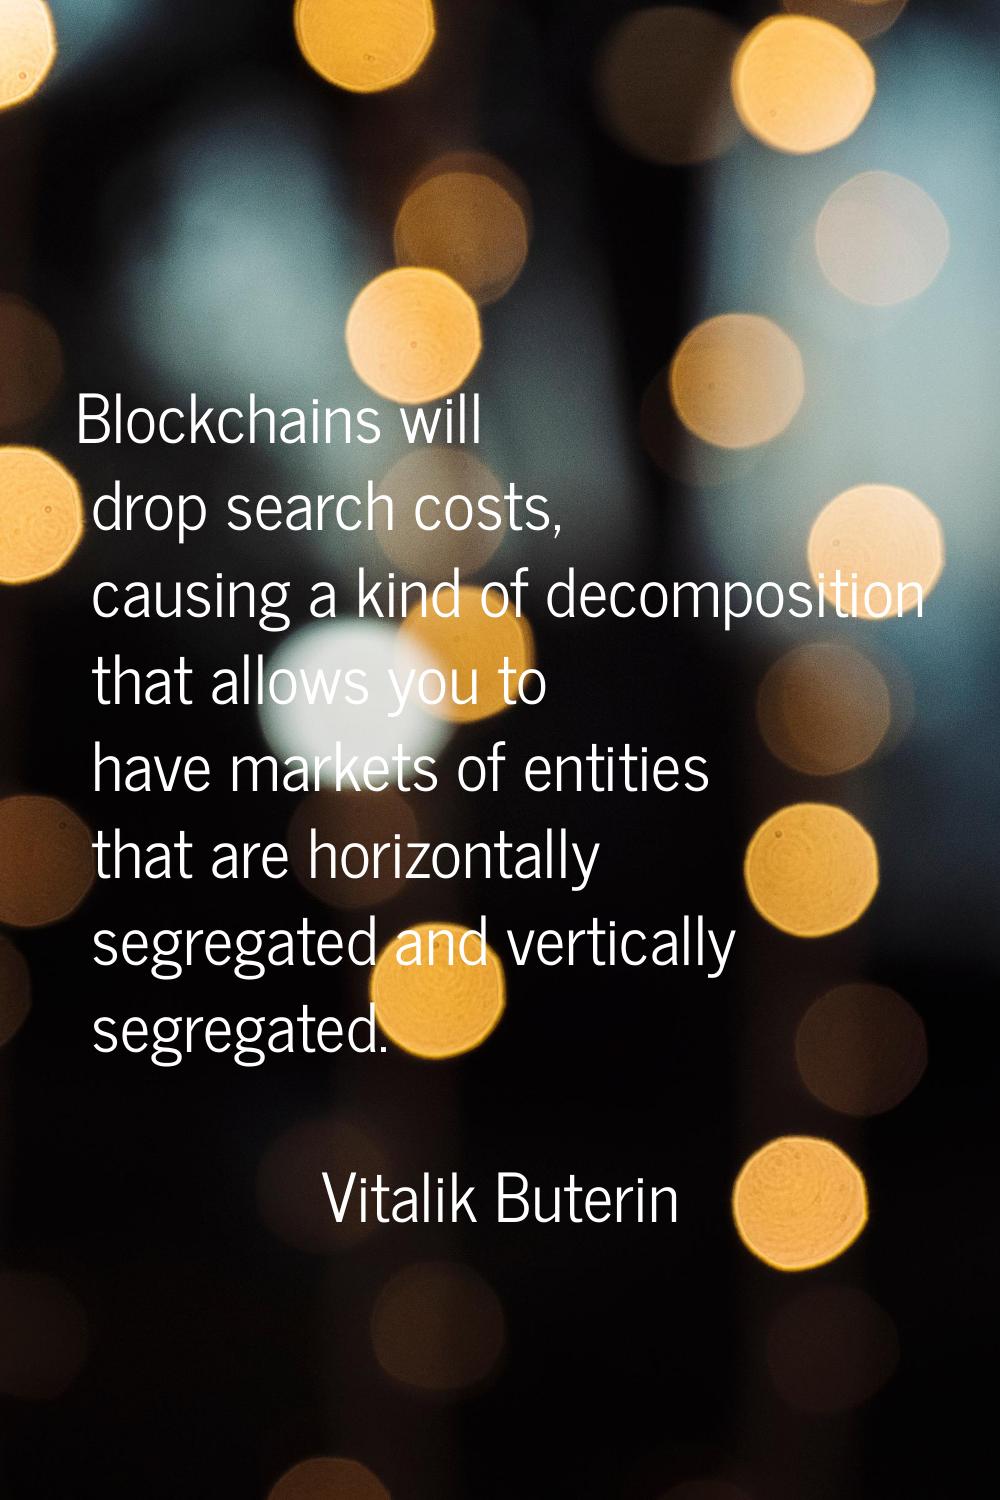 Blockchains will drop search costs, causing a kind of decomposition that allows you to have markets